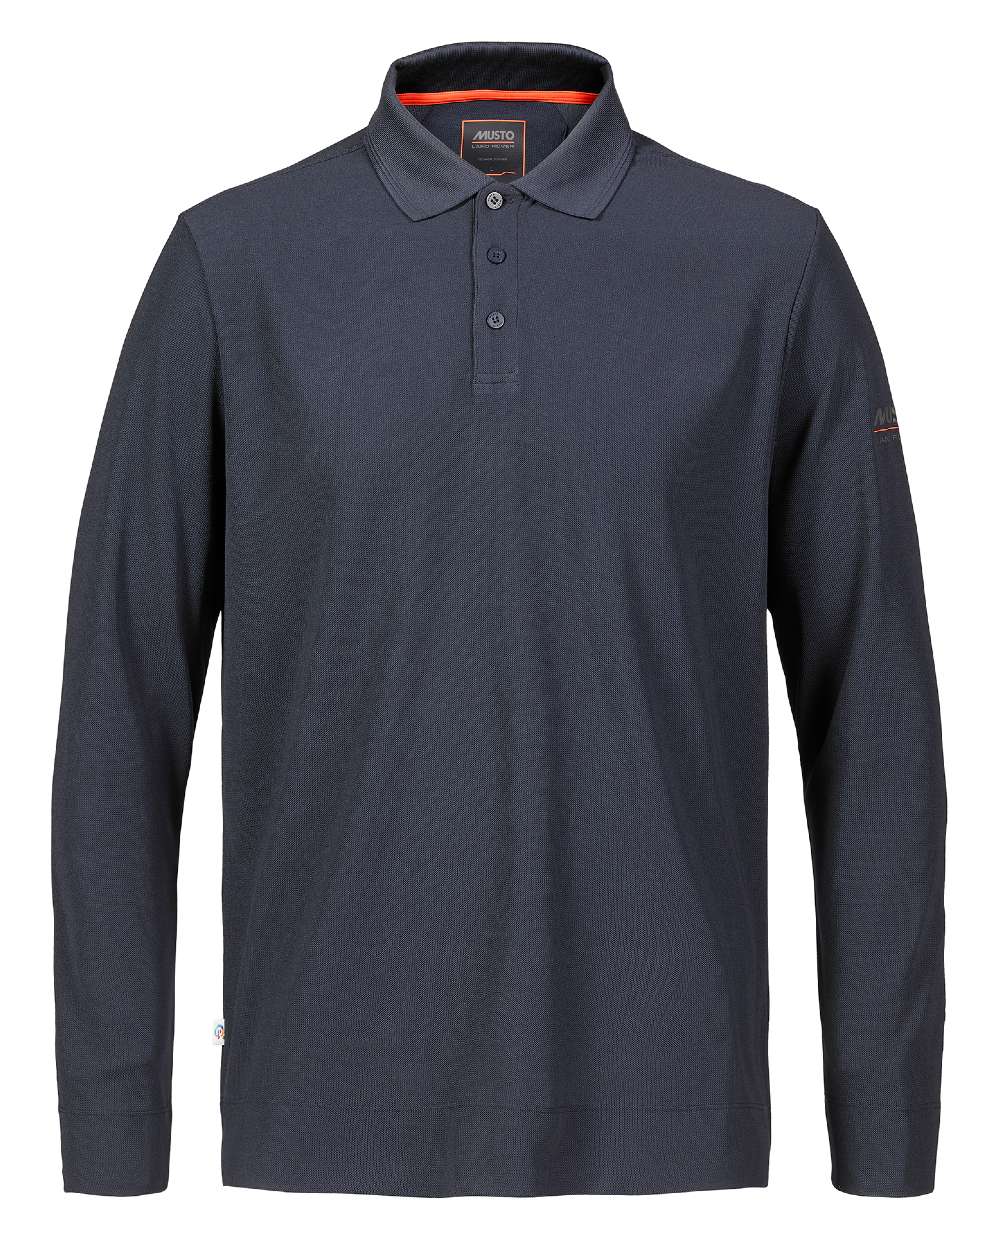 Navy Coloured Musto Mens Land Rover Edye Long Sleeve Polo Shirt On A White Background 